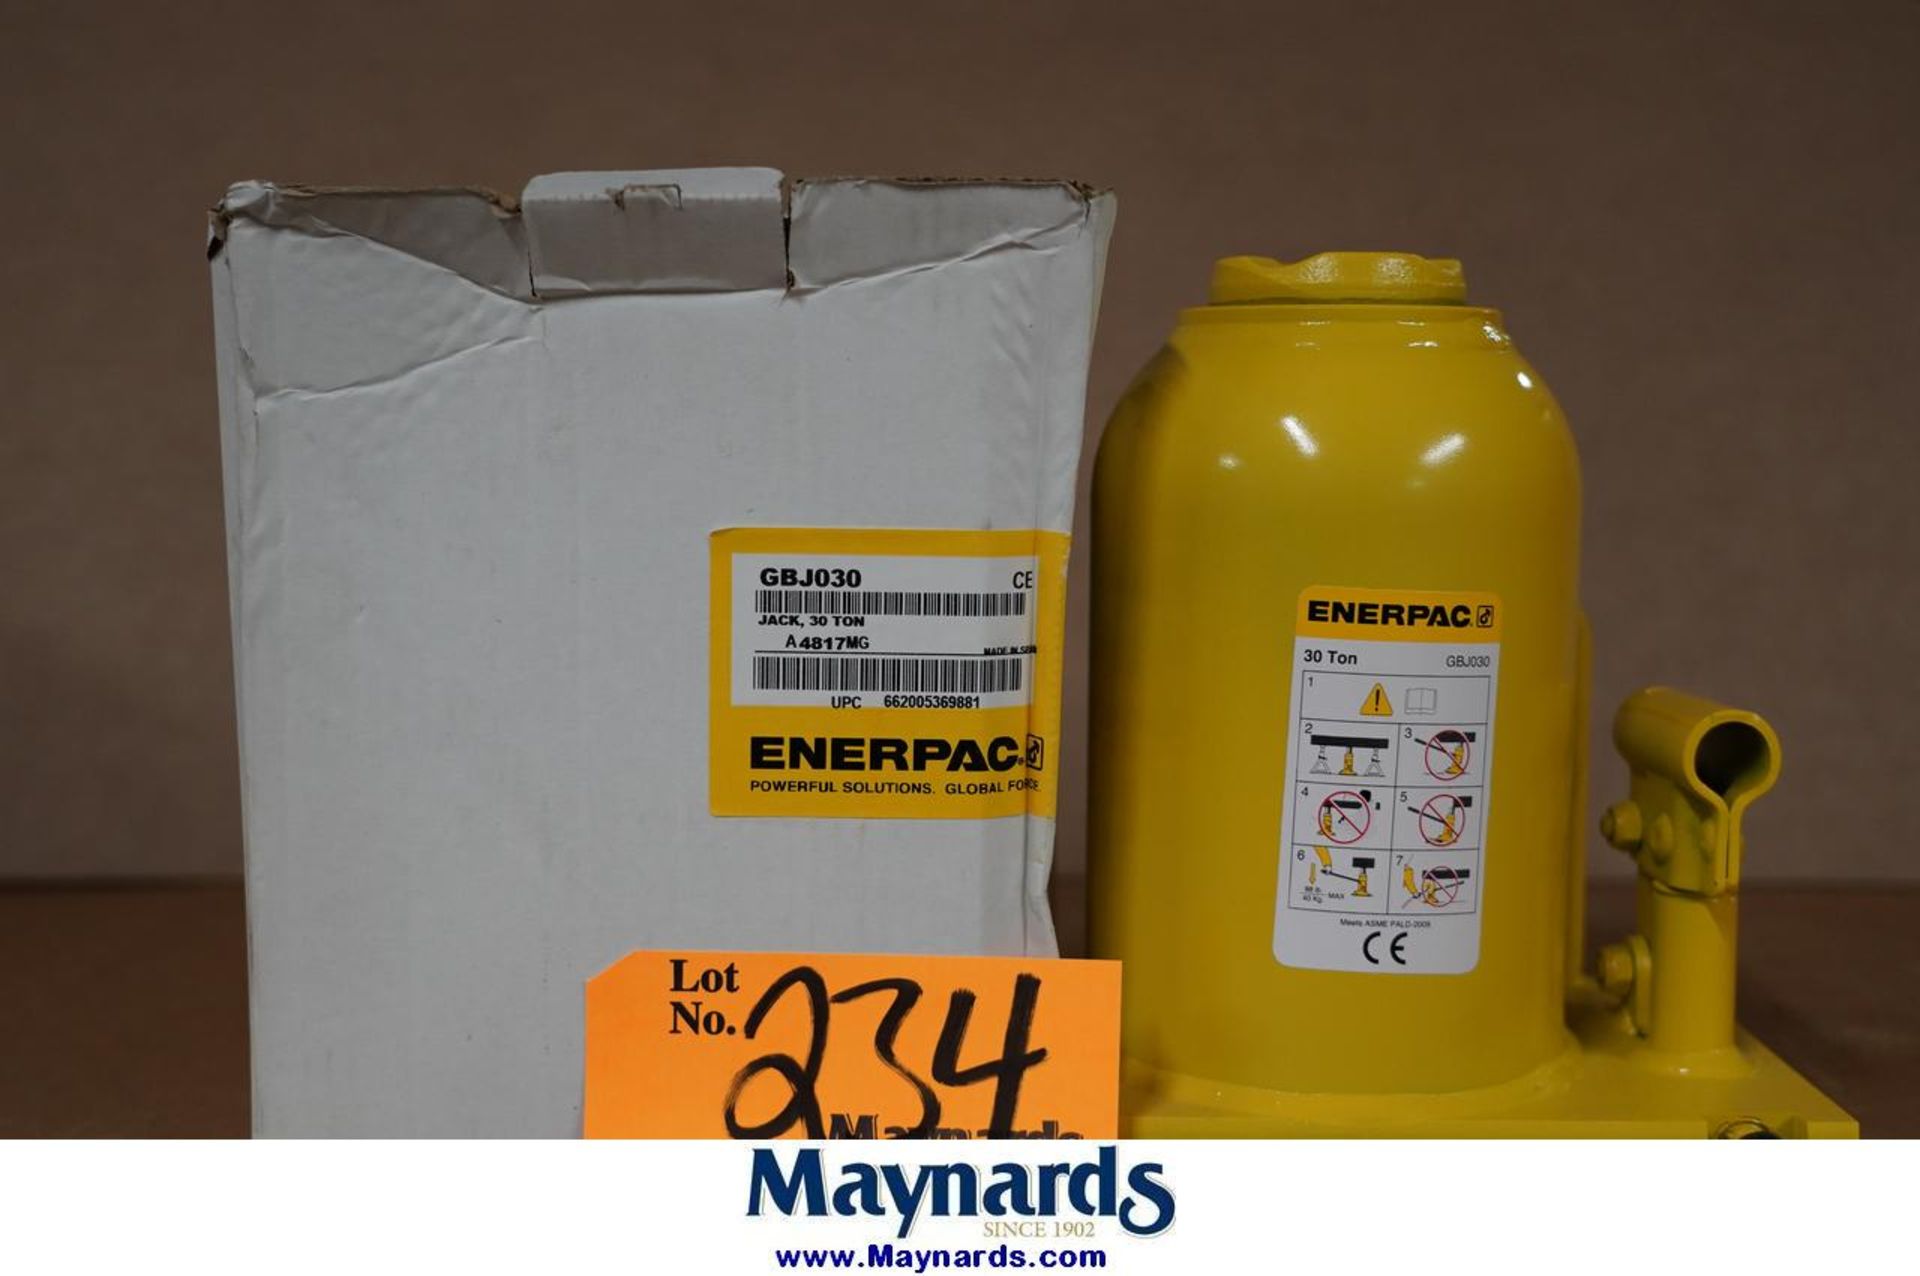 Enerpac GBJ030 30 Ton Self Contained Hydraulic Bottle Jack